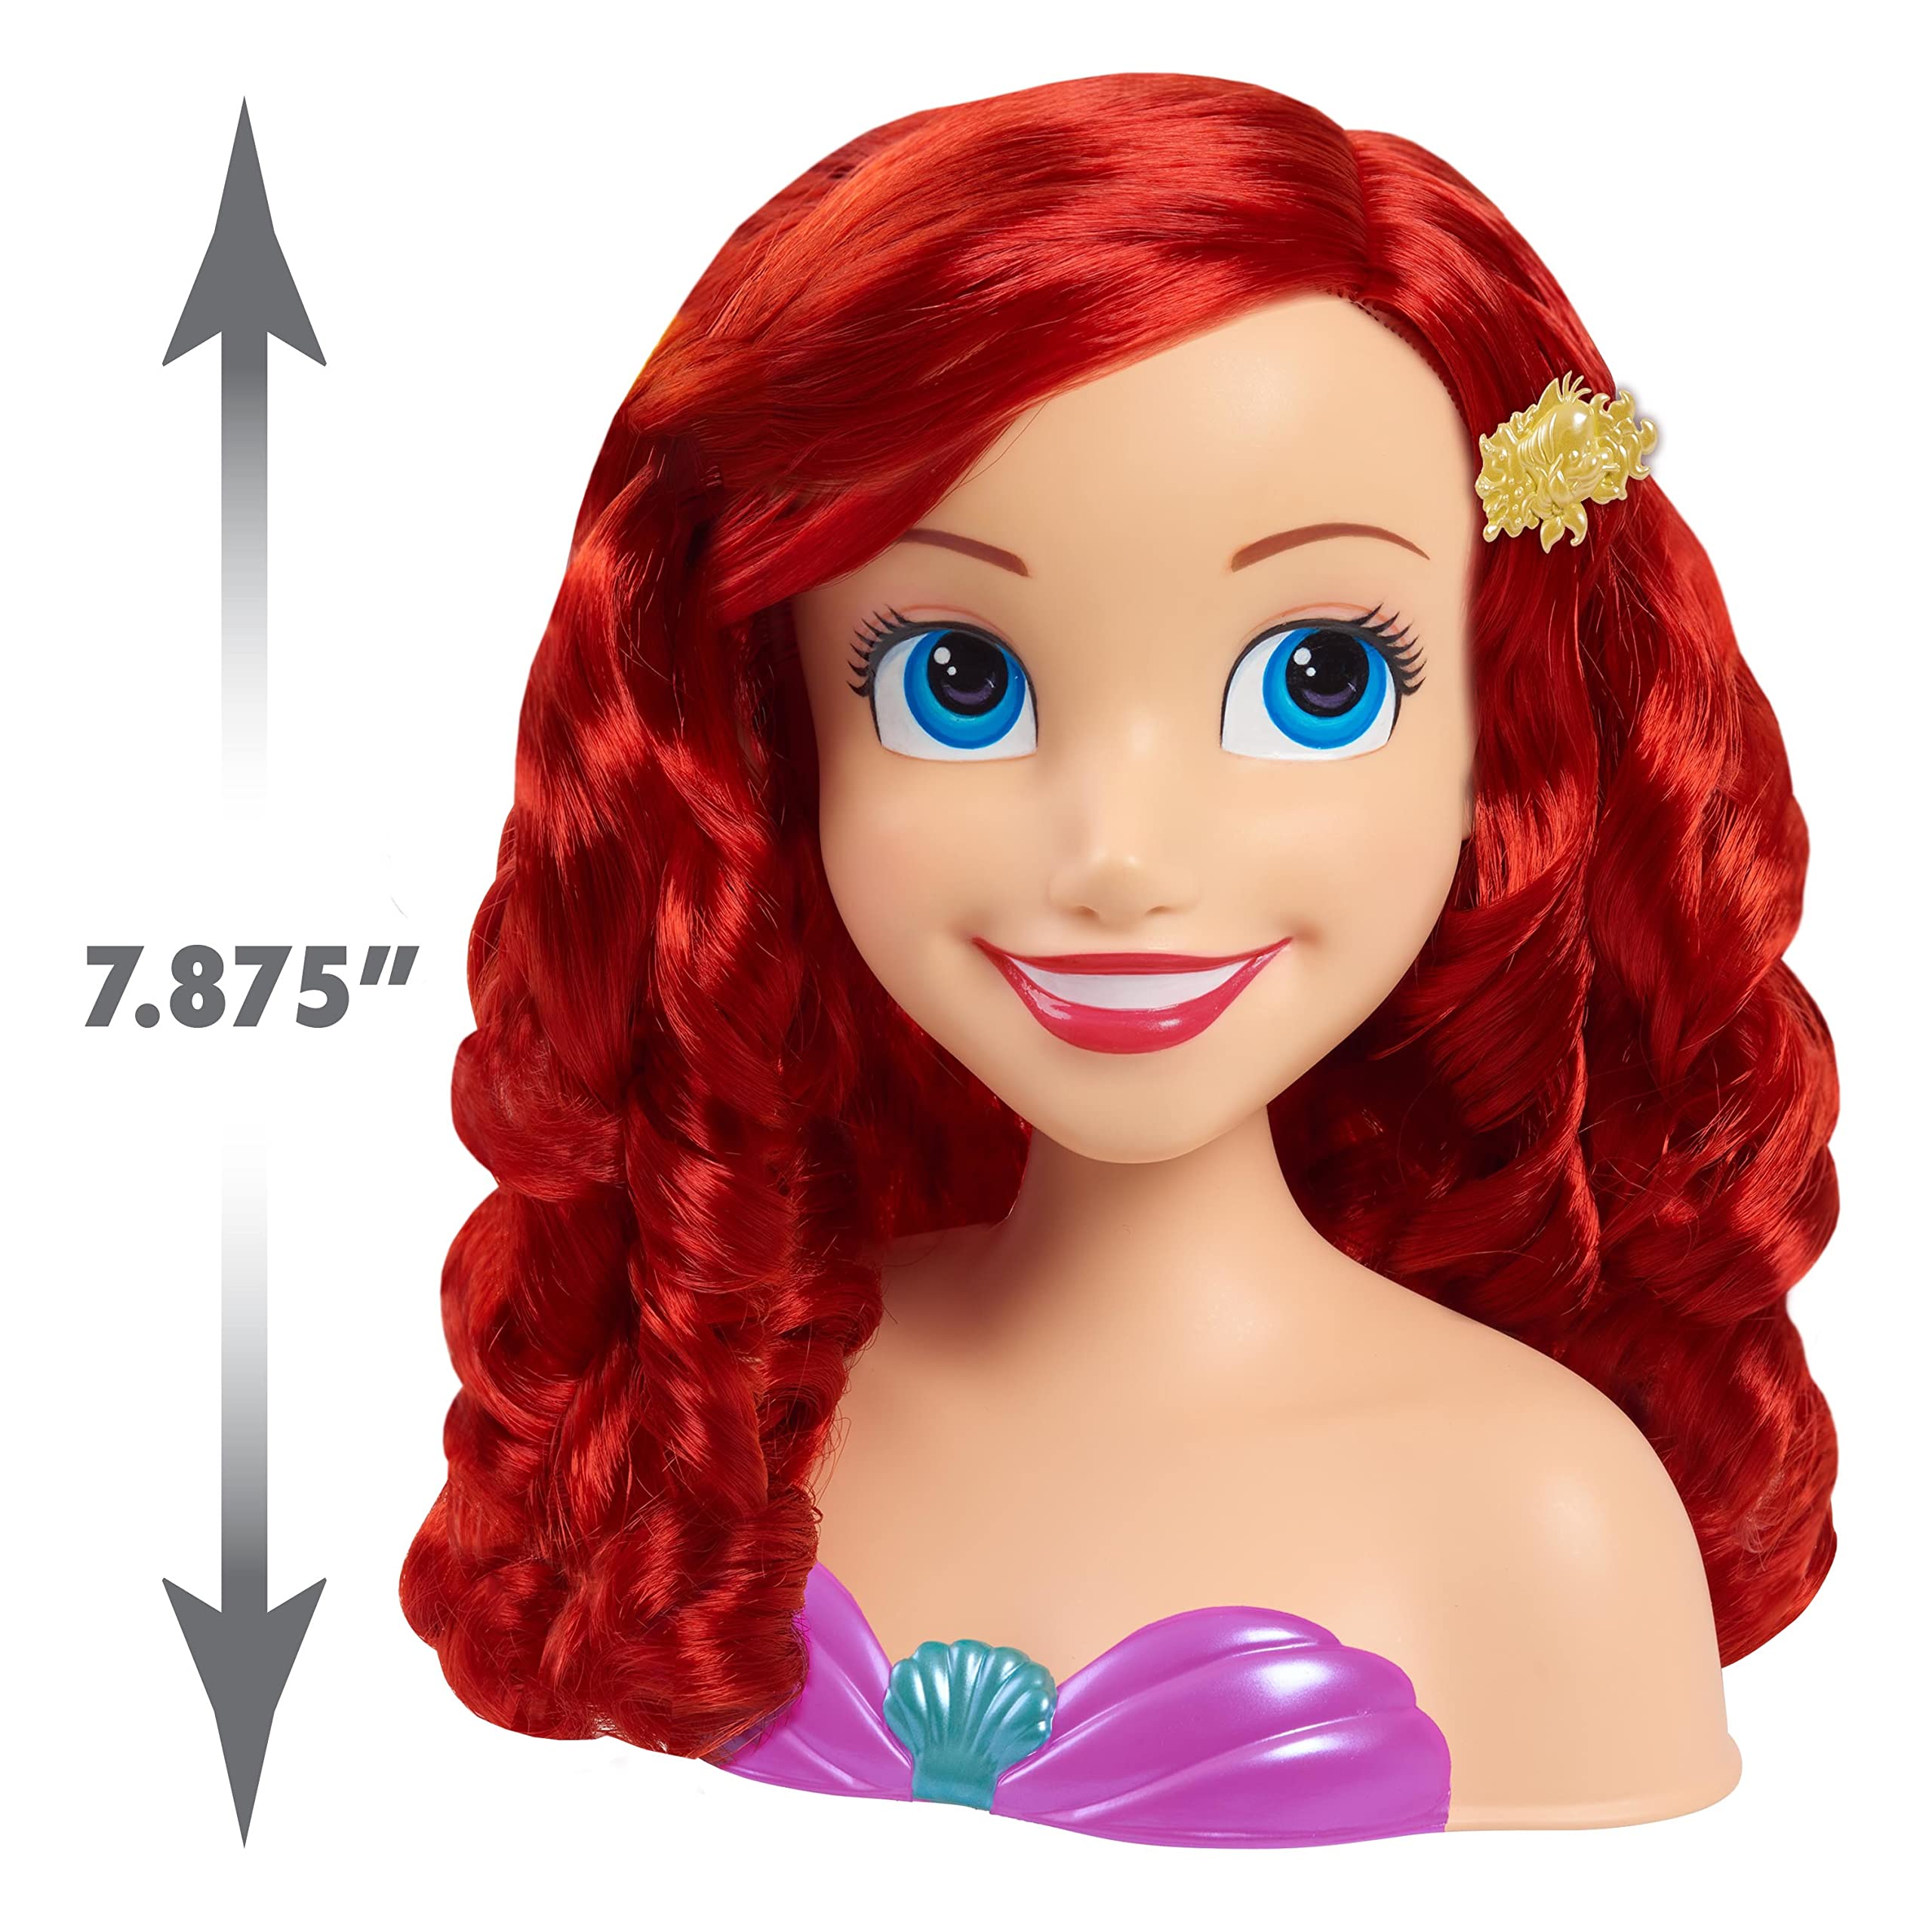 Disney Princess Ariel Styling Head, 18-pieces, Pretend Play, Officially Licensed Kids Toys for Ages 3 Up, Gifts and Presents by Just Play